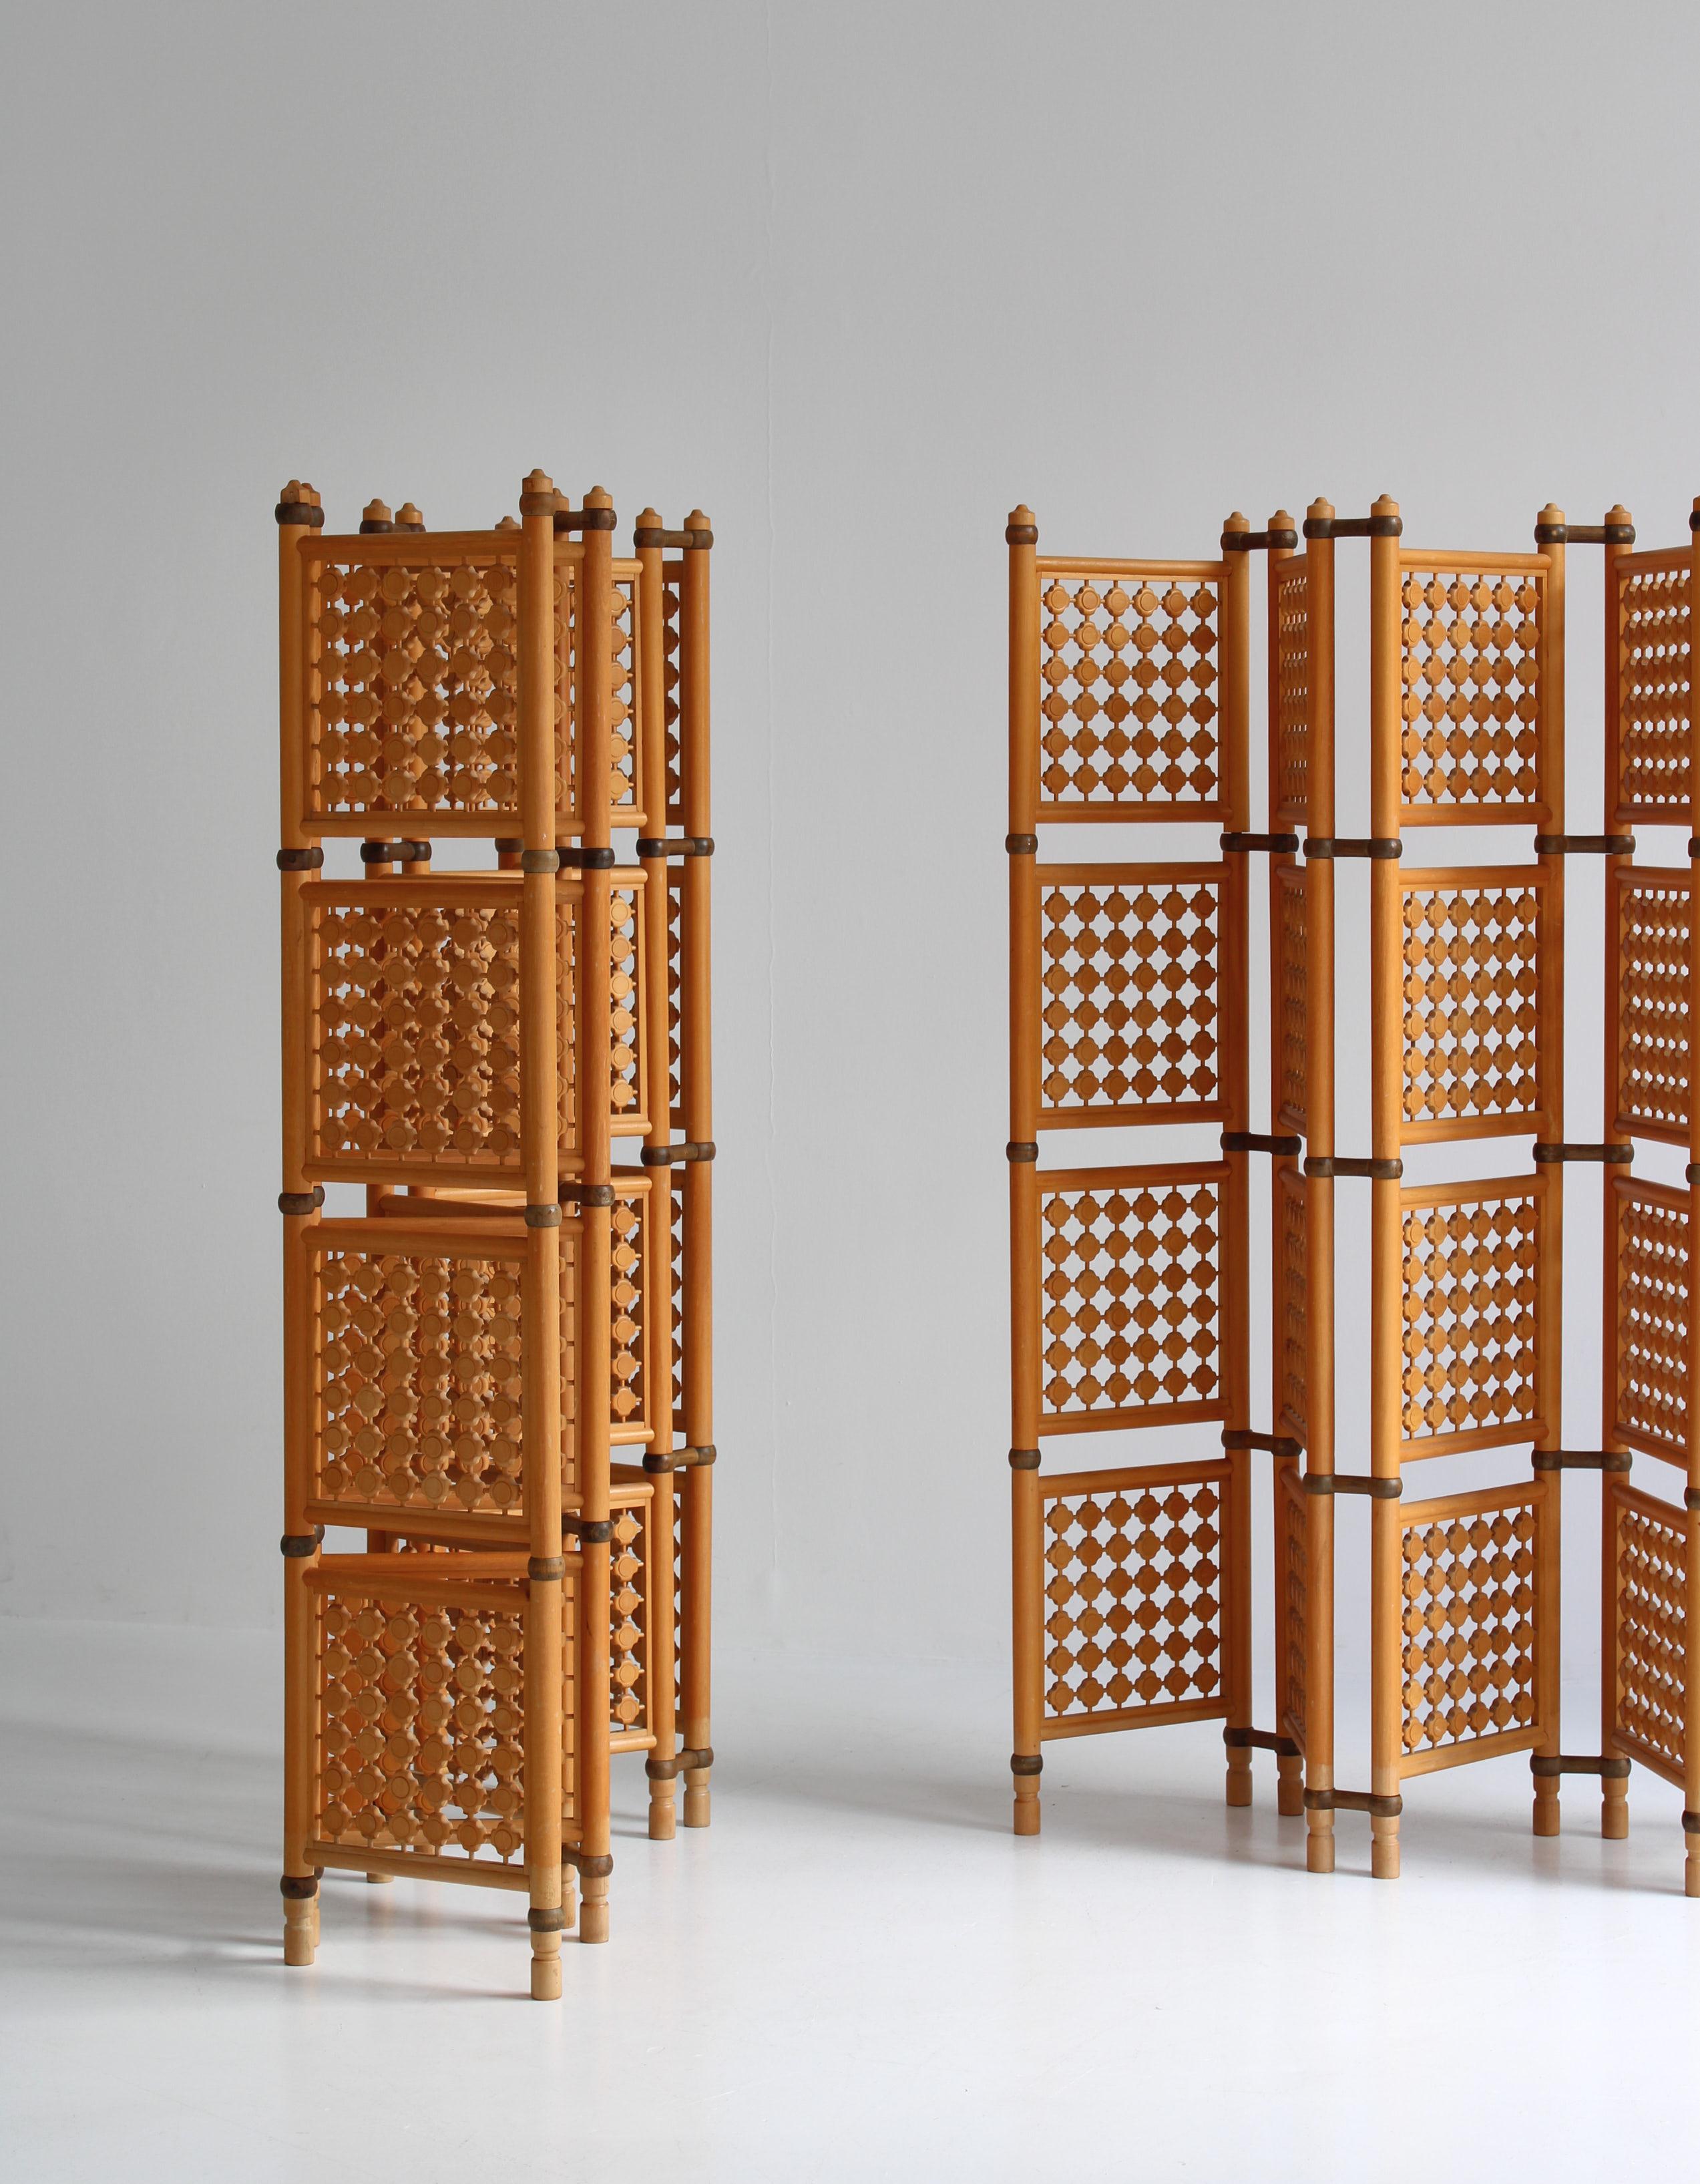 Set of Scandinavian Modern Screens or Room Dividers in Stained Beechwood, 1940s For Sale 3